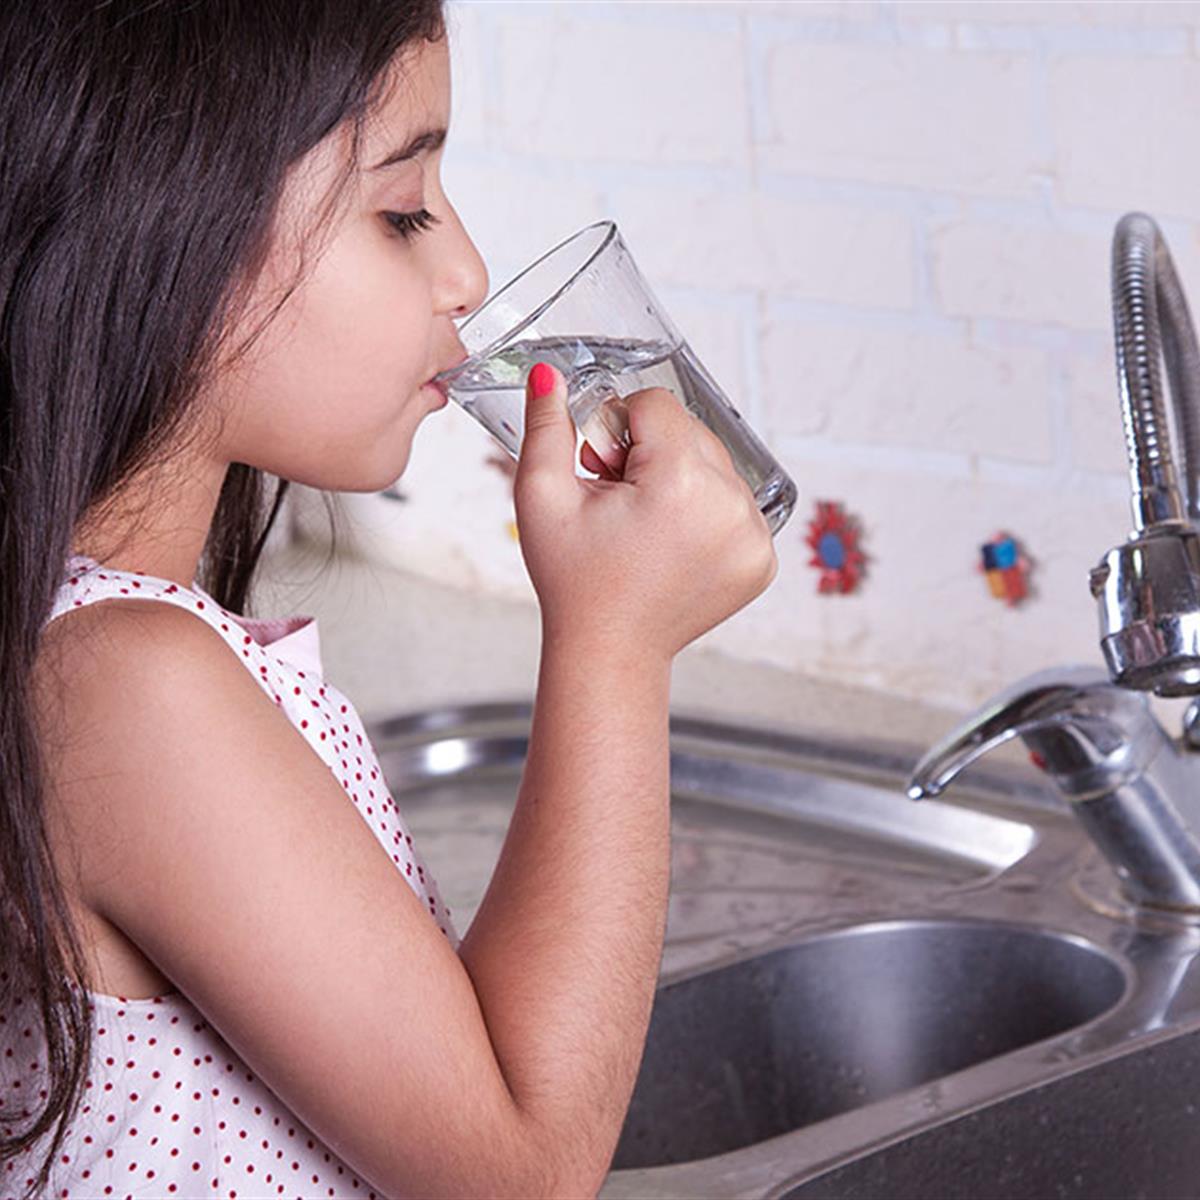 is-your-drinking-water-safe-healthychildren